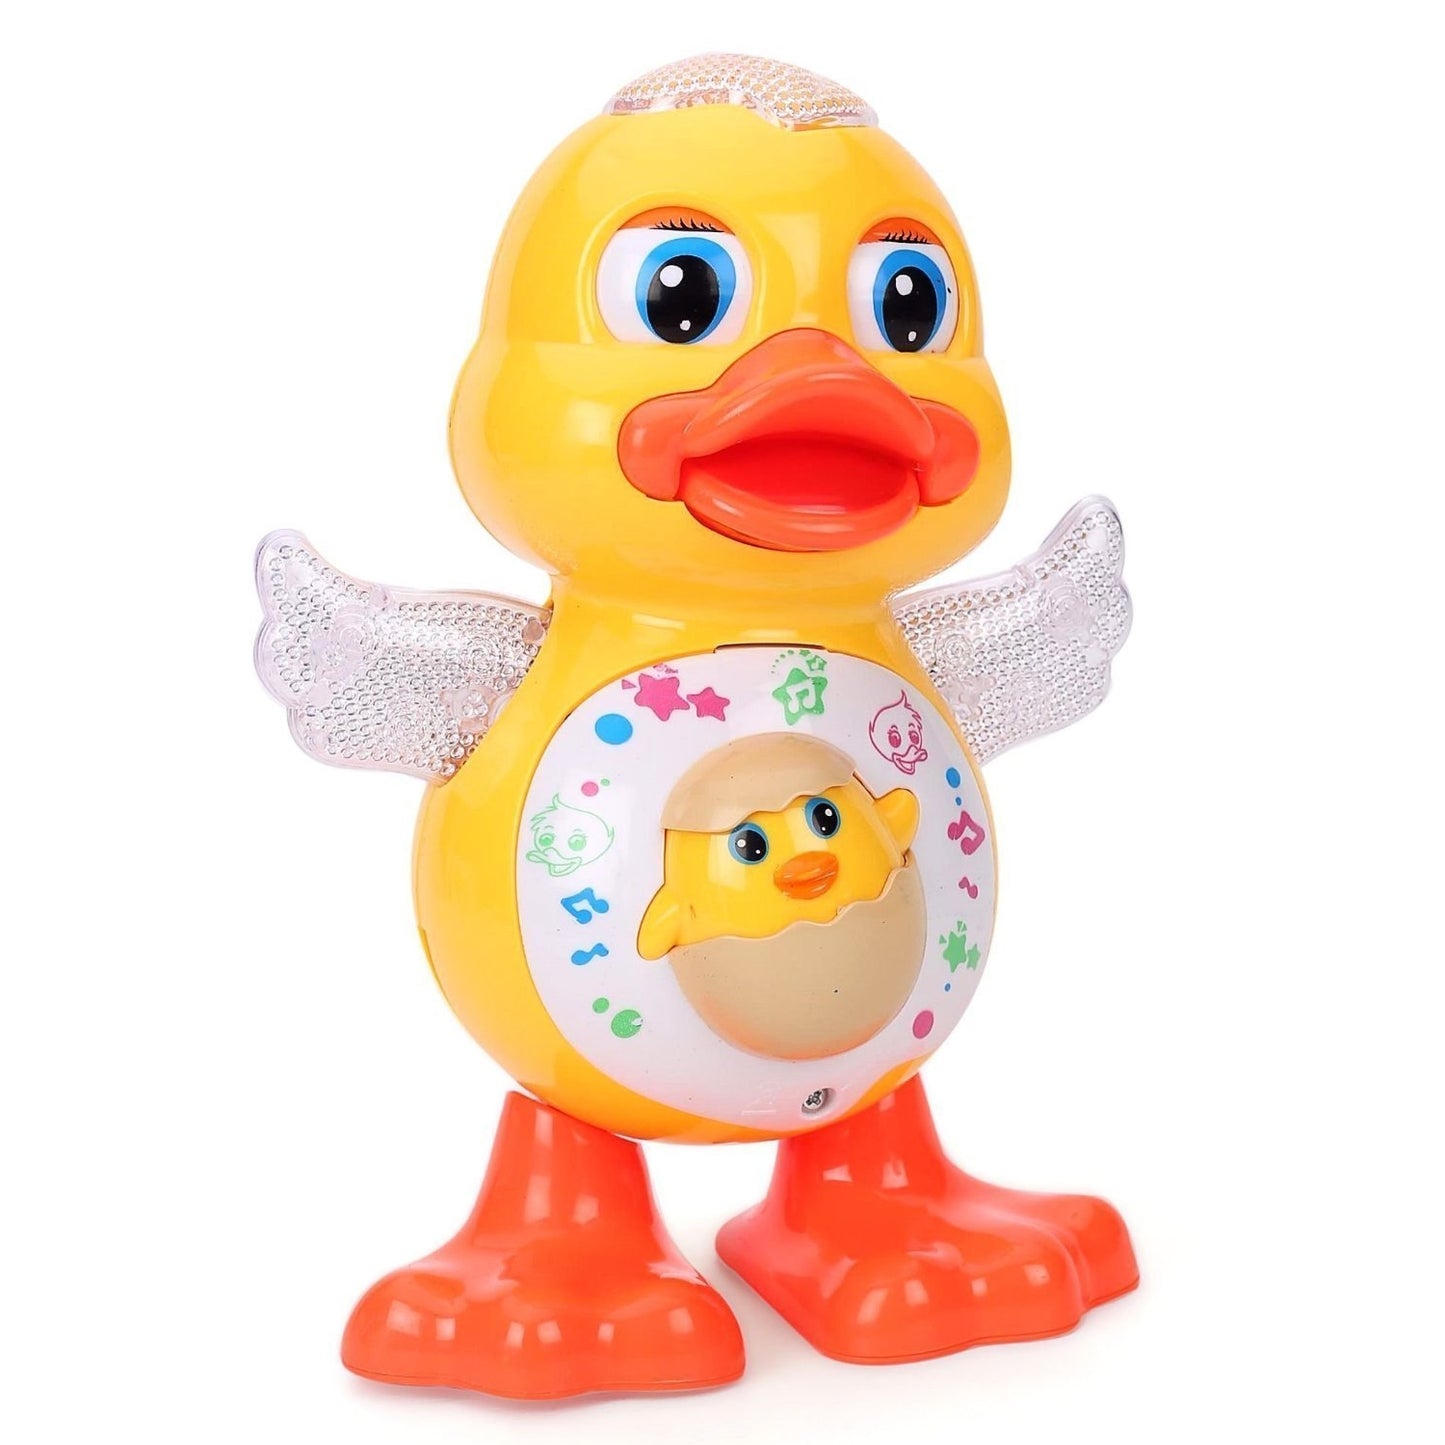 Dancing Duck Toy For Kids, Dancing Toy  With Music Flashing Lights And Real Dancing Action